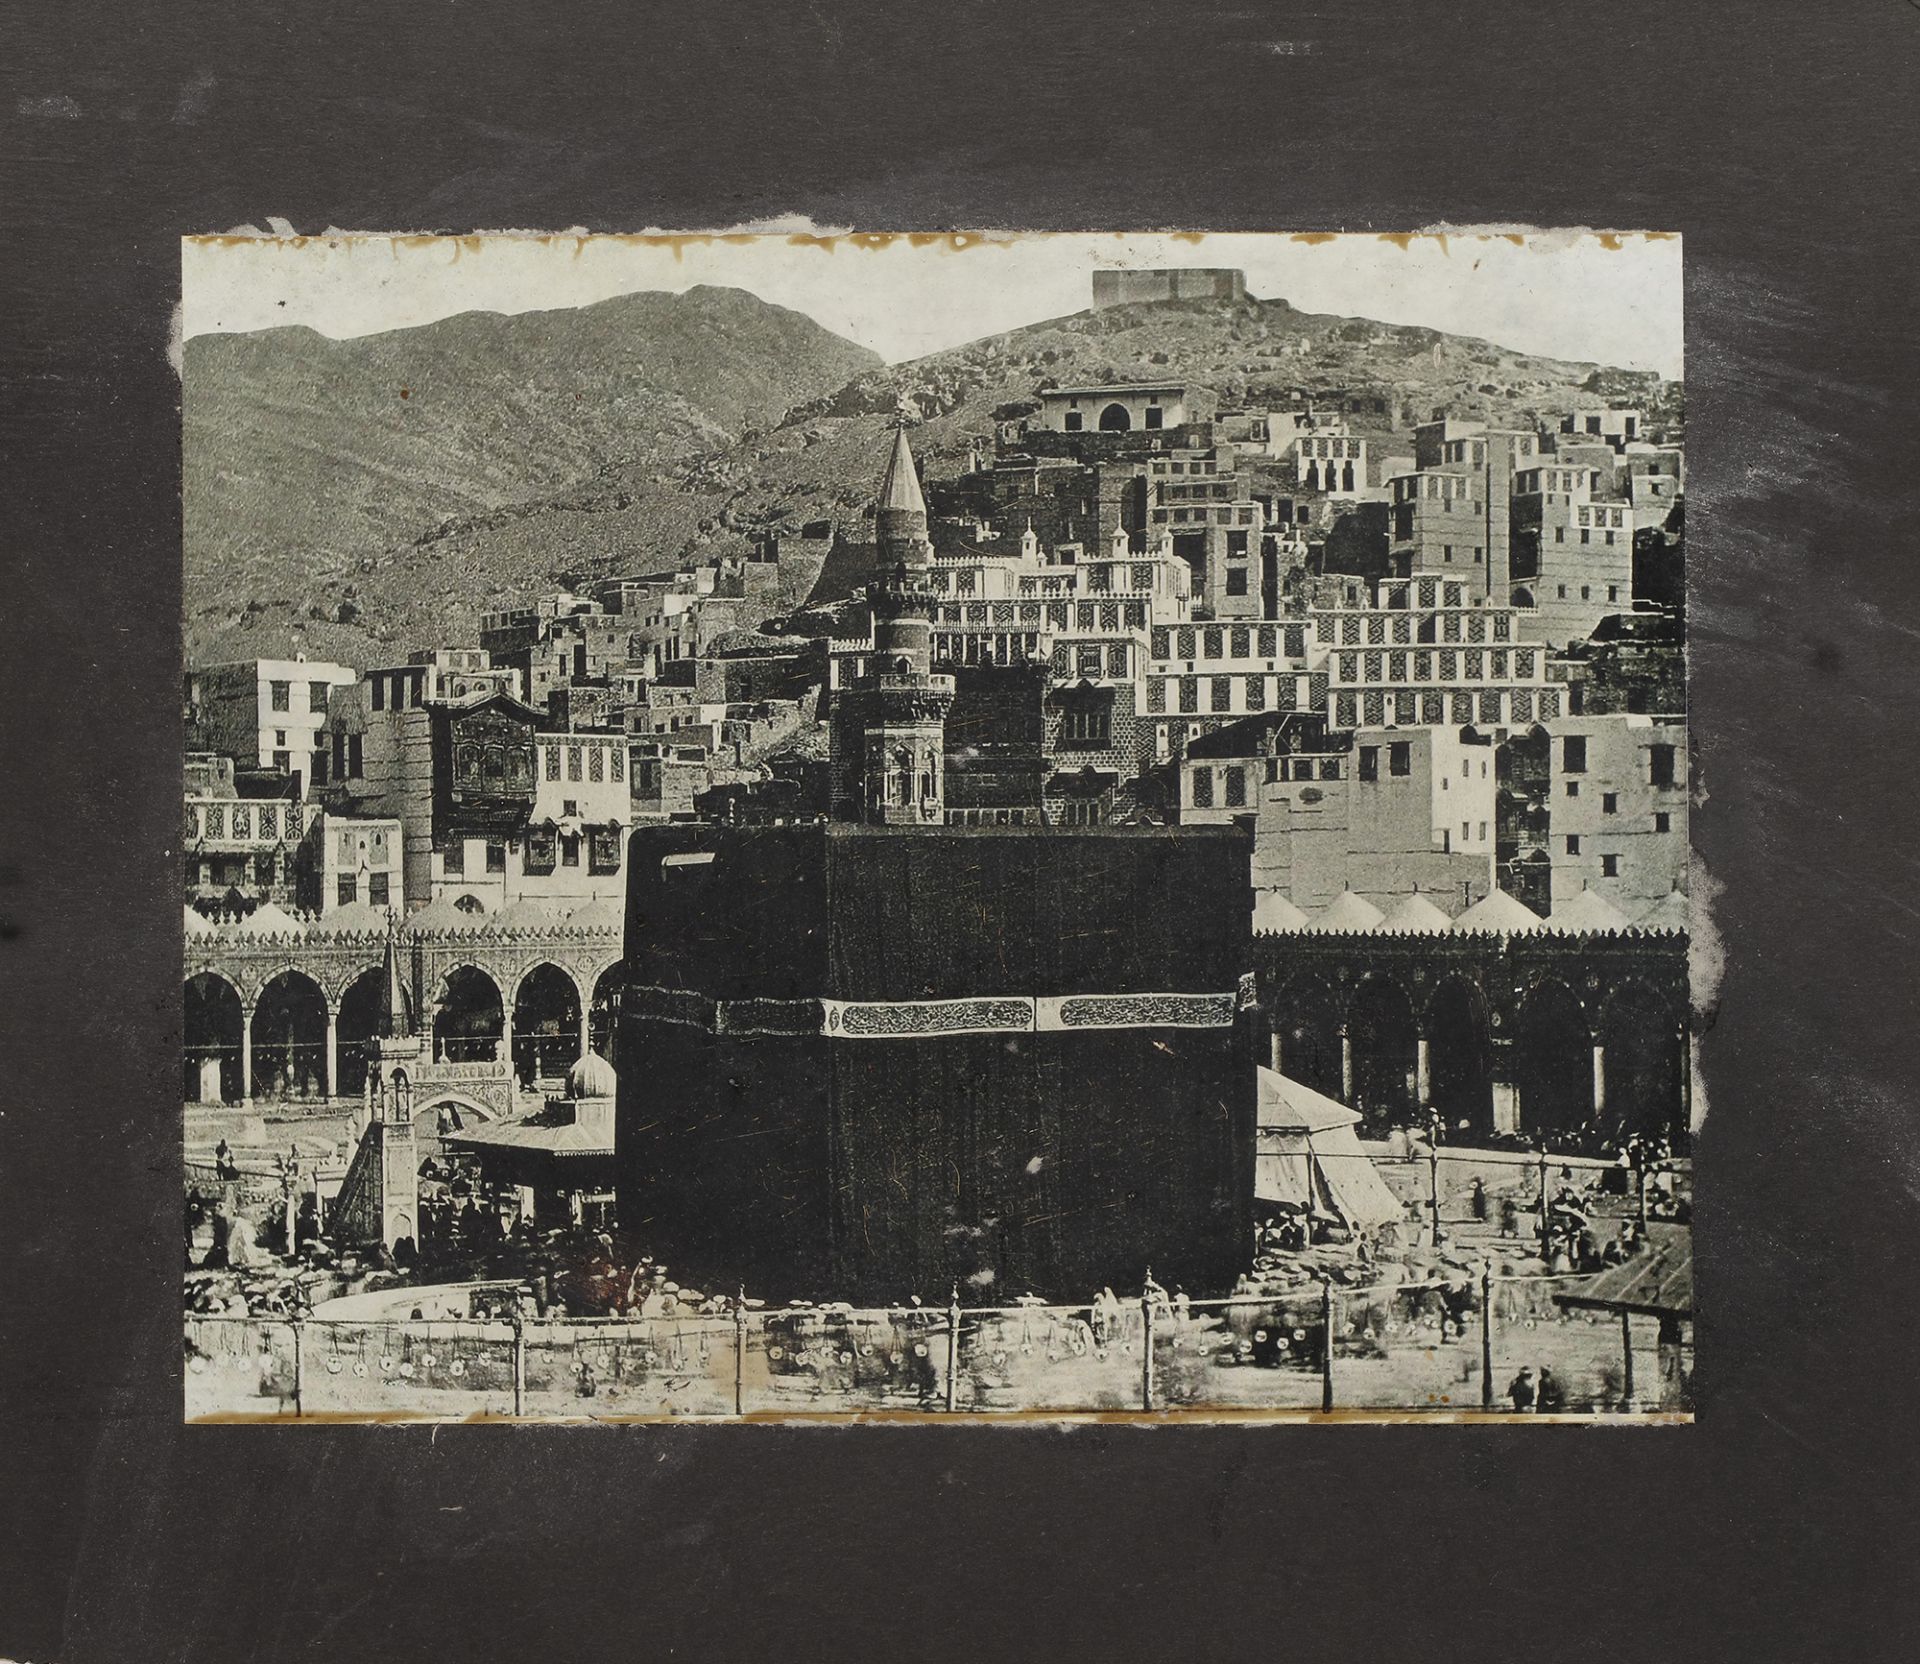 MECCA AND MEDINA, A COLLECTION OF 14 PHOTOGRAPHS DURING THE HAJJ, EARLY 20TH CENTURY - Image 13 of 15